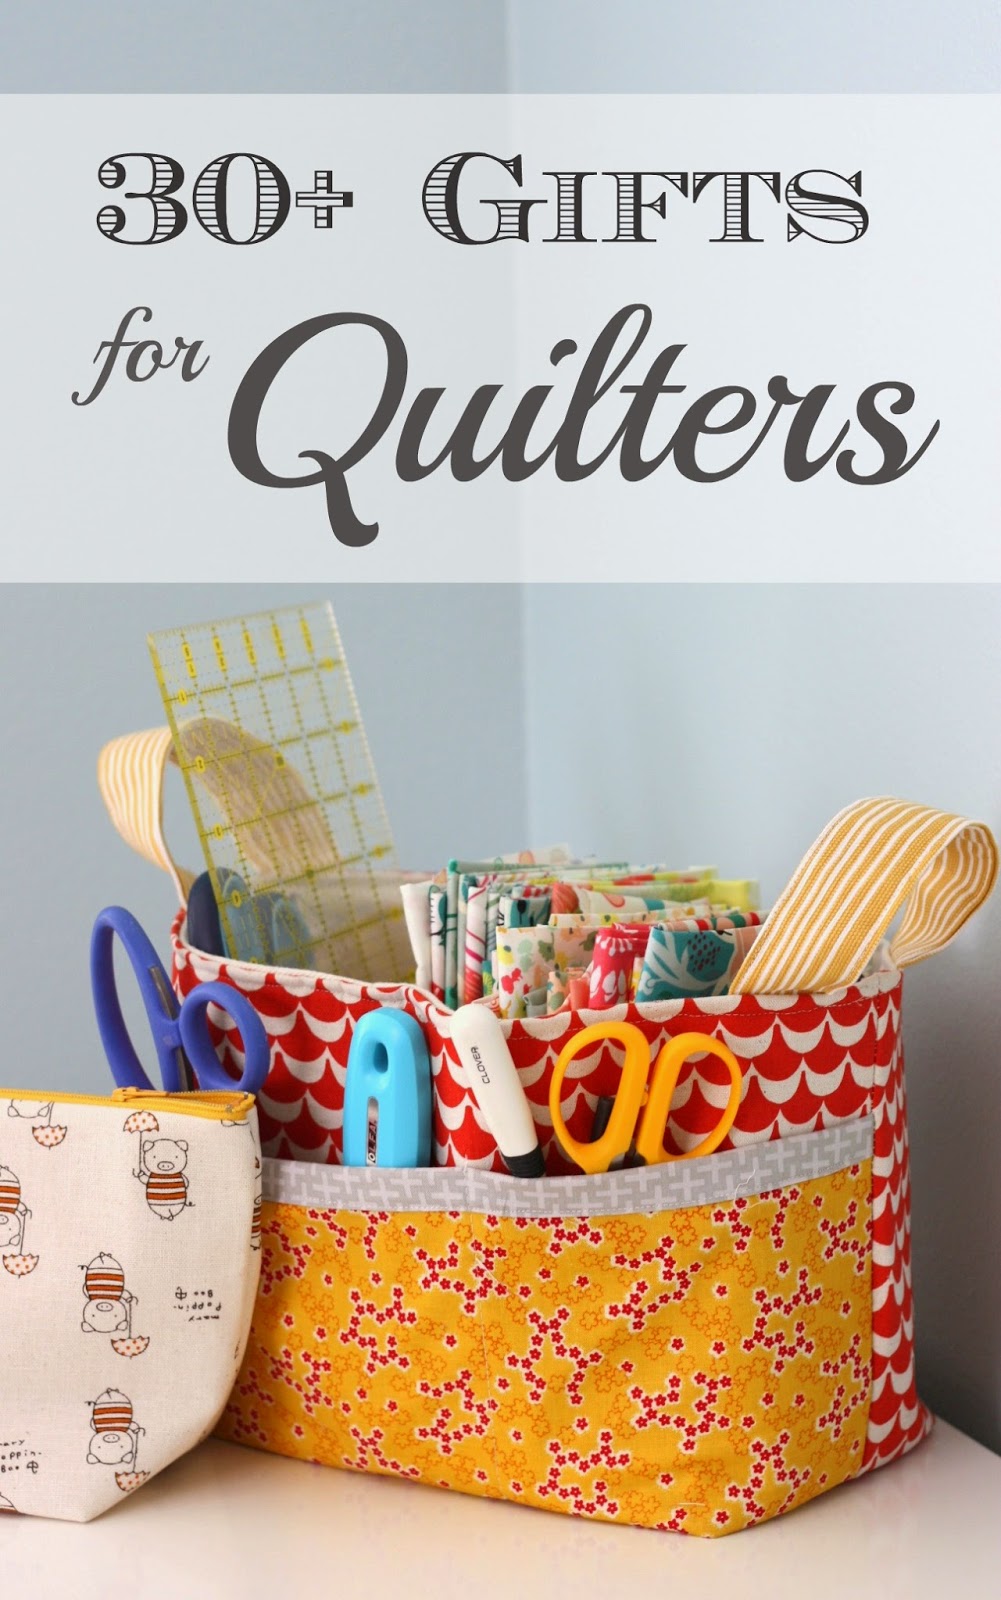 Gifts for Quilters 2014 Diary of a Quilter a quilt blog